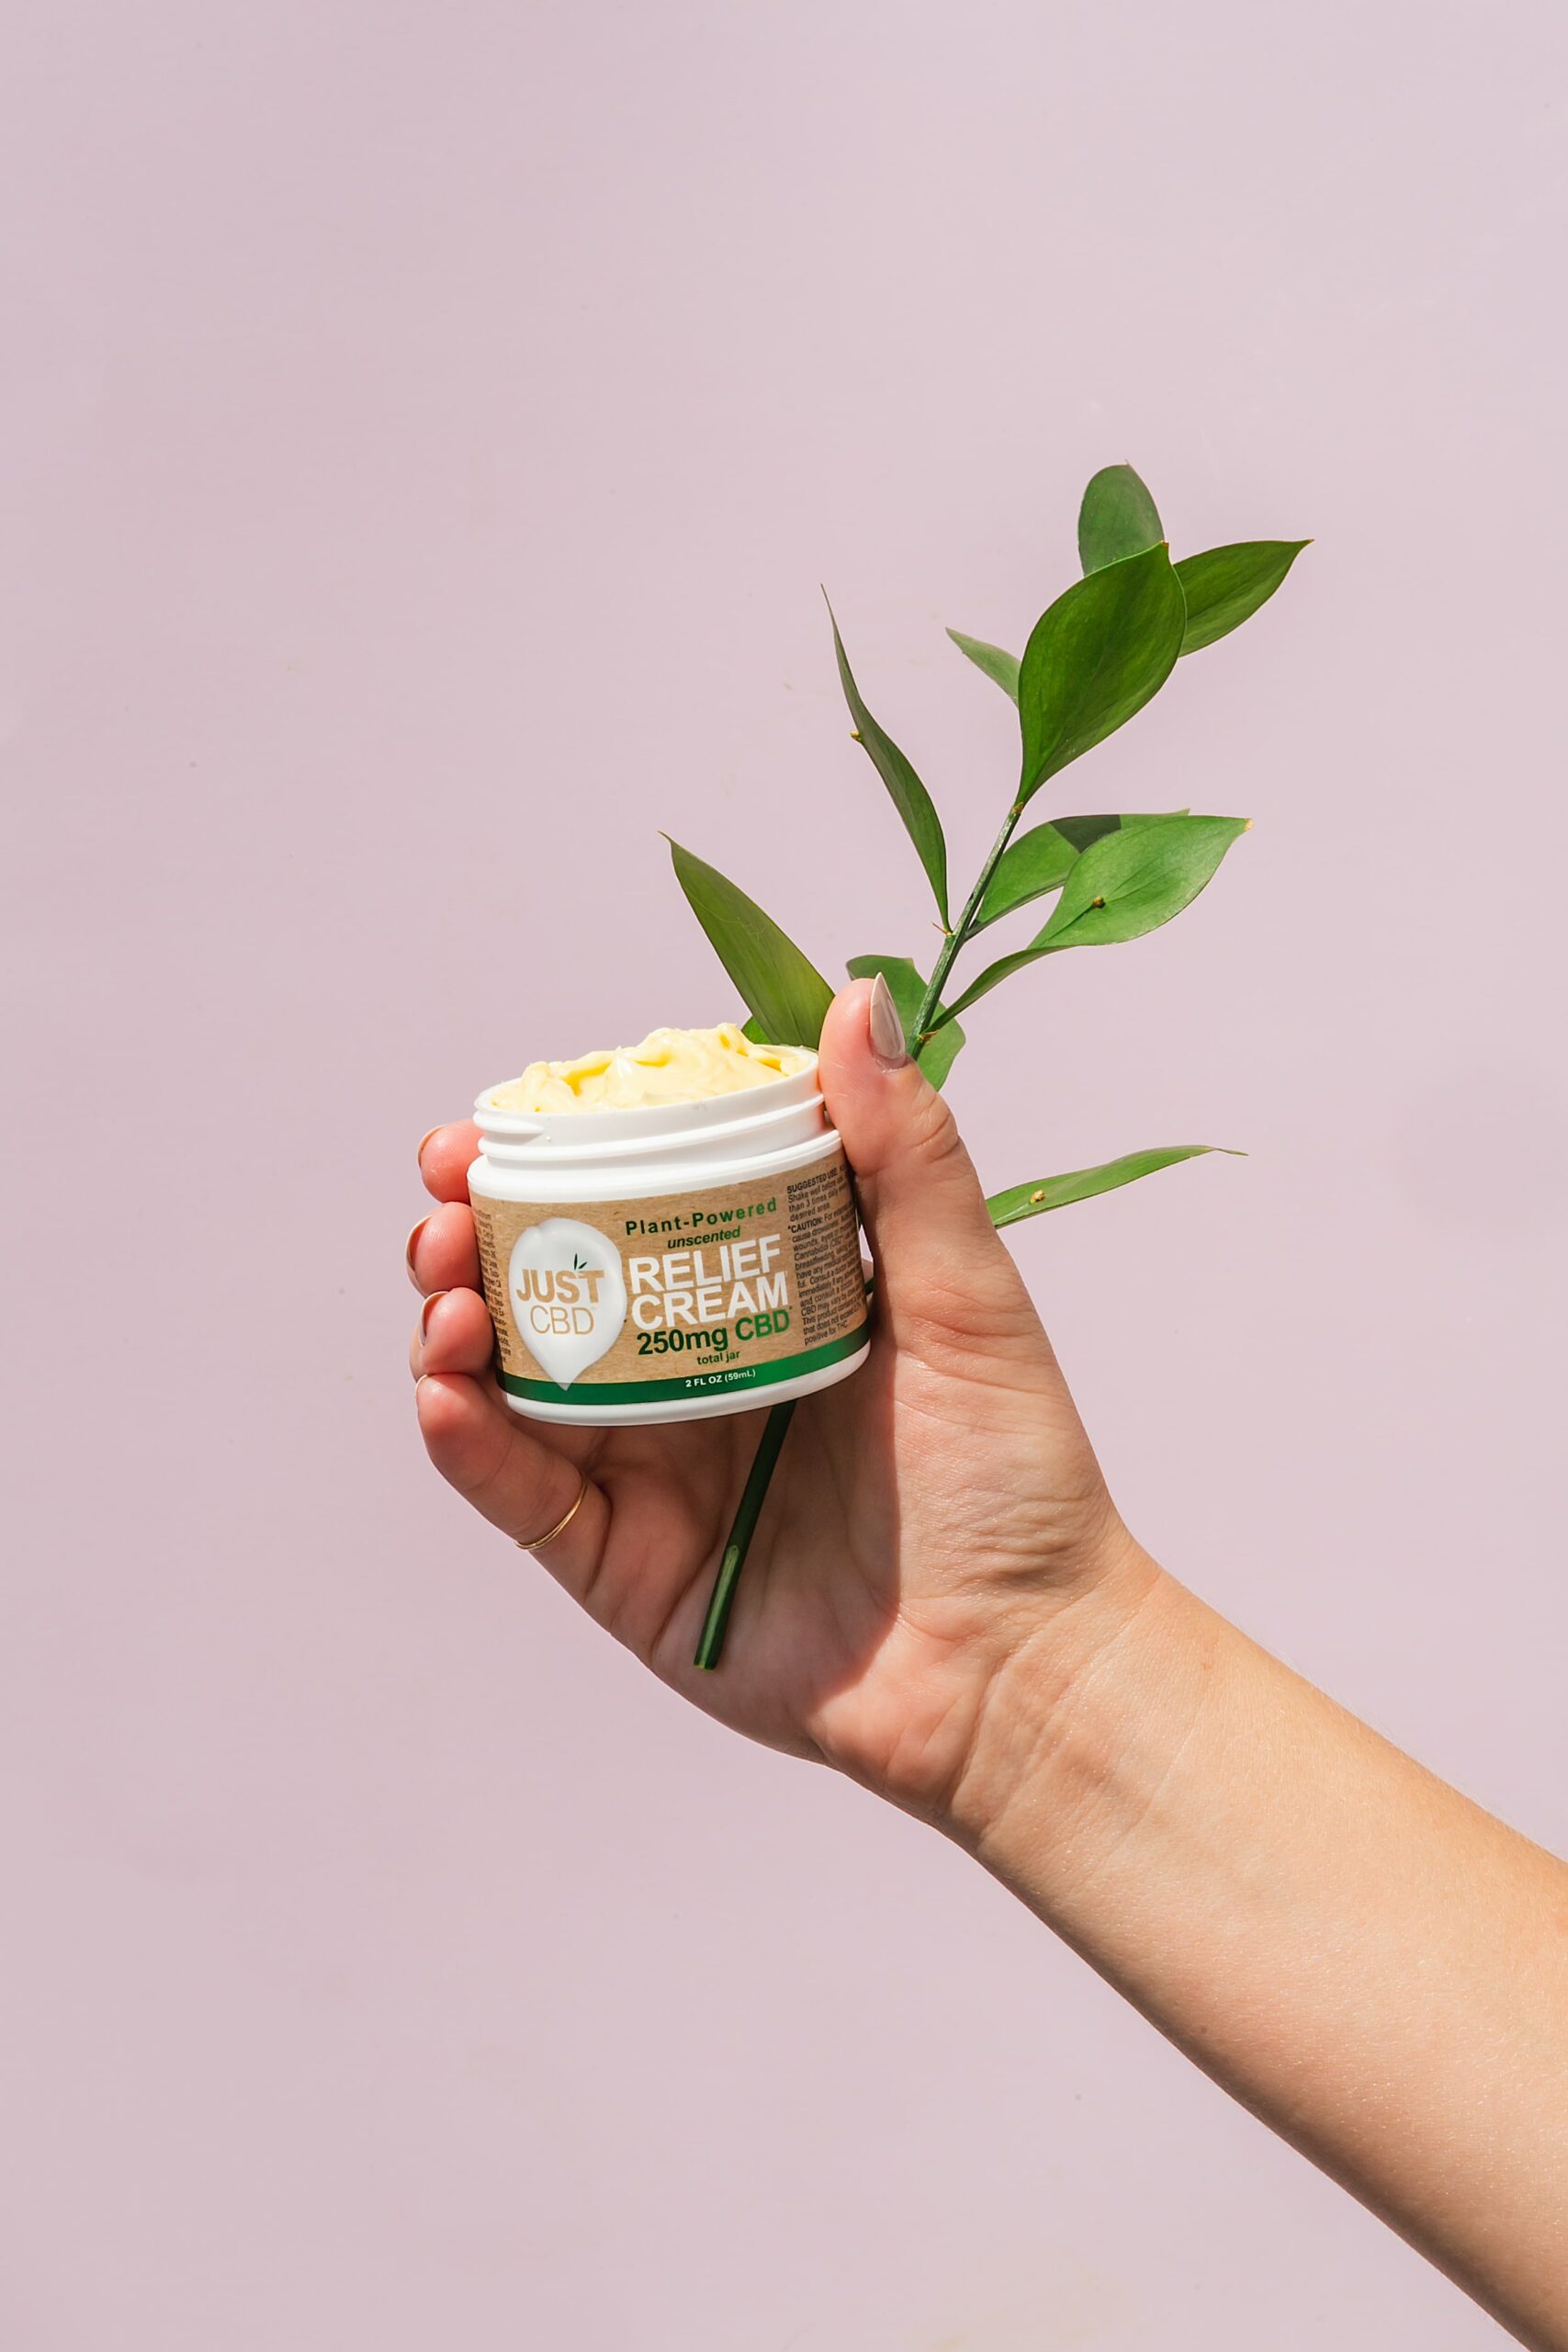 HOW DOES USING TOPICAL CREAM COMPARE TO INGESTING CBD?